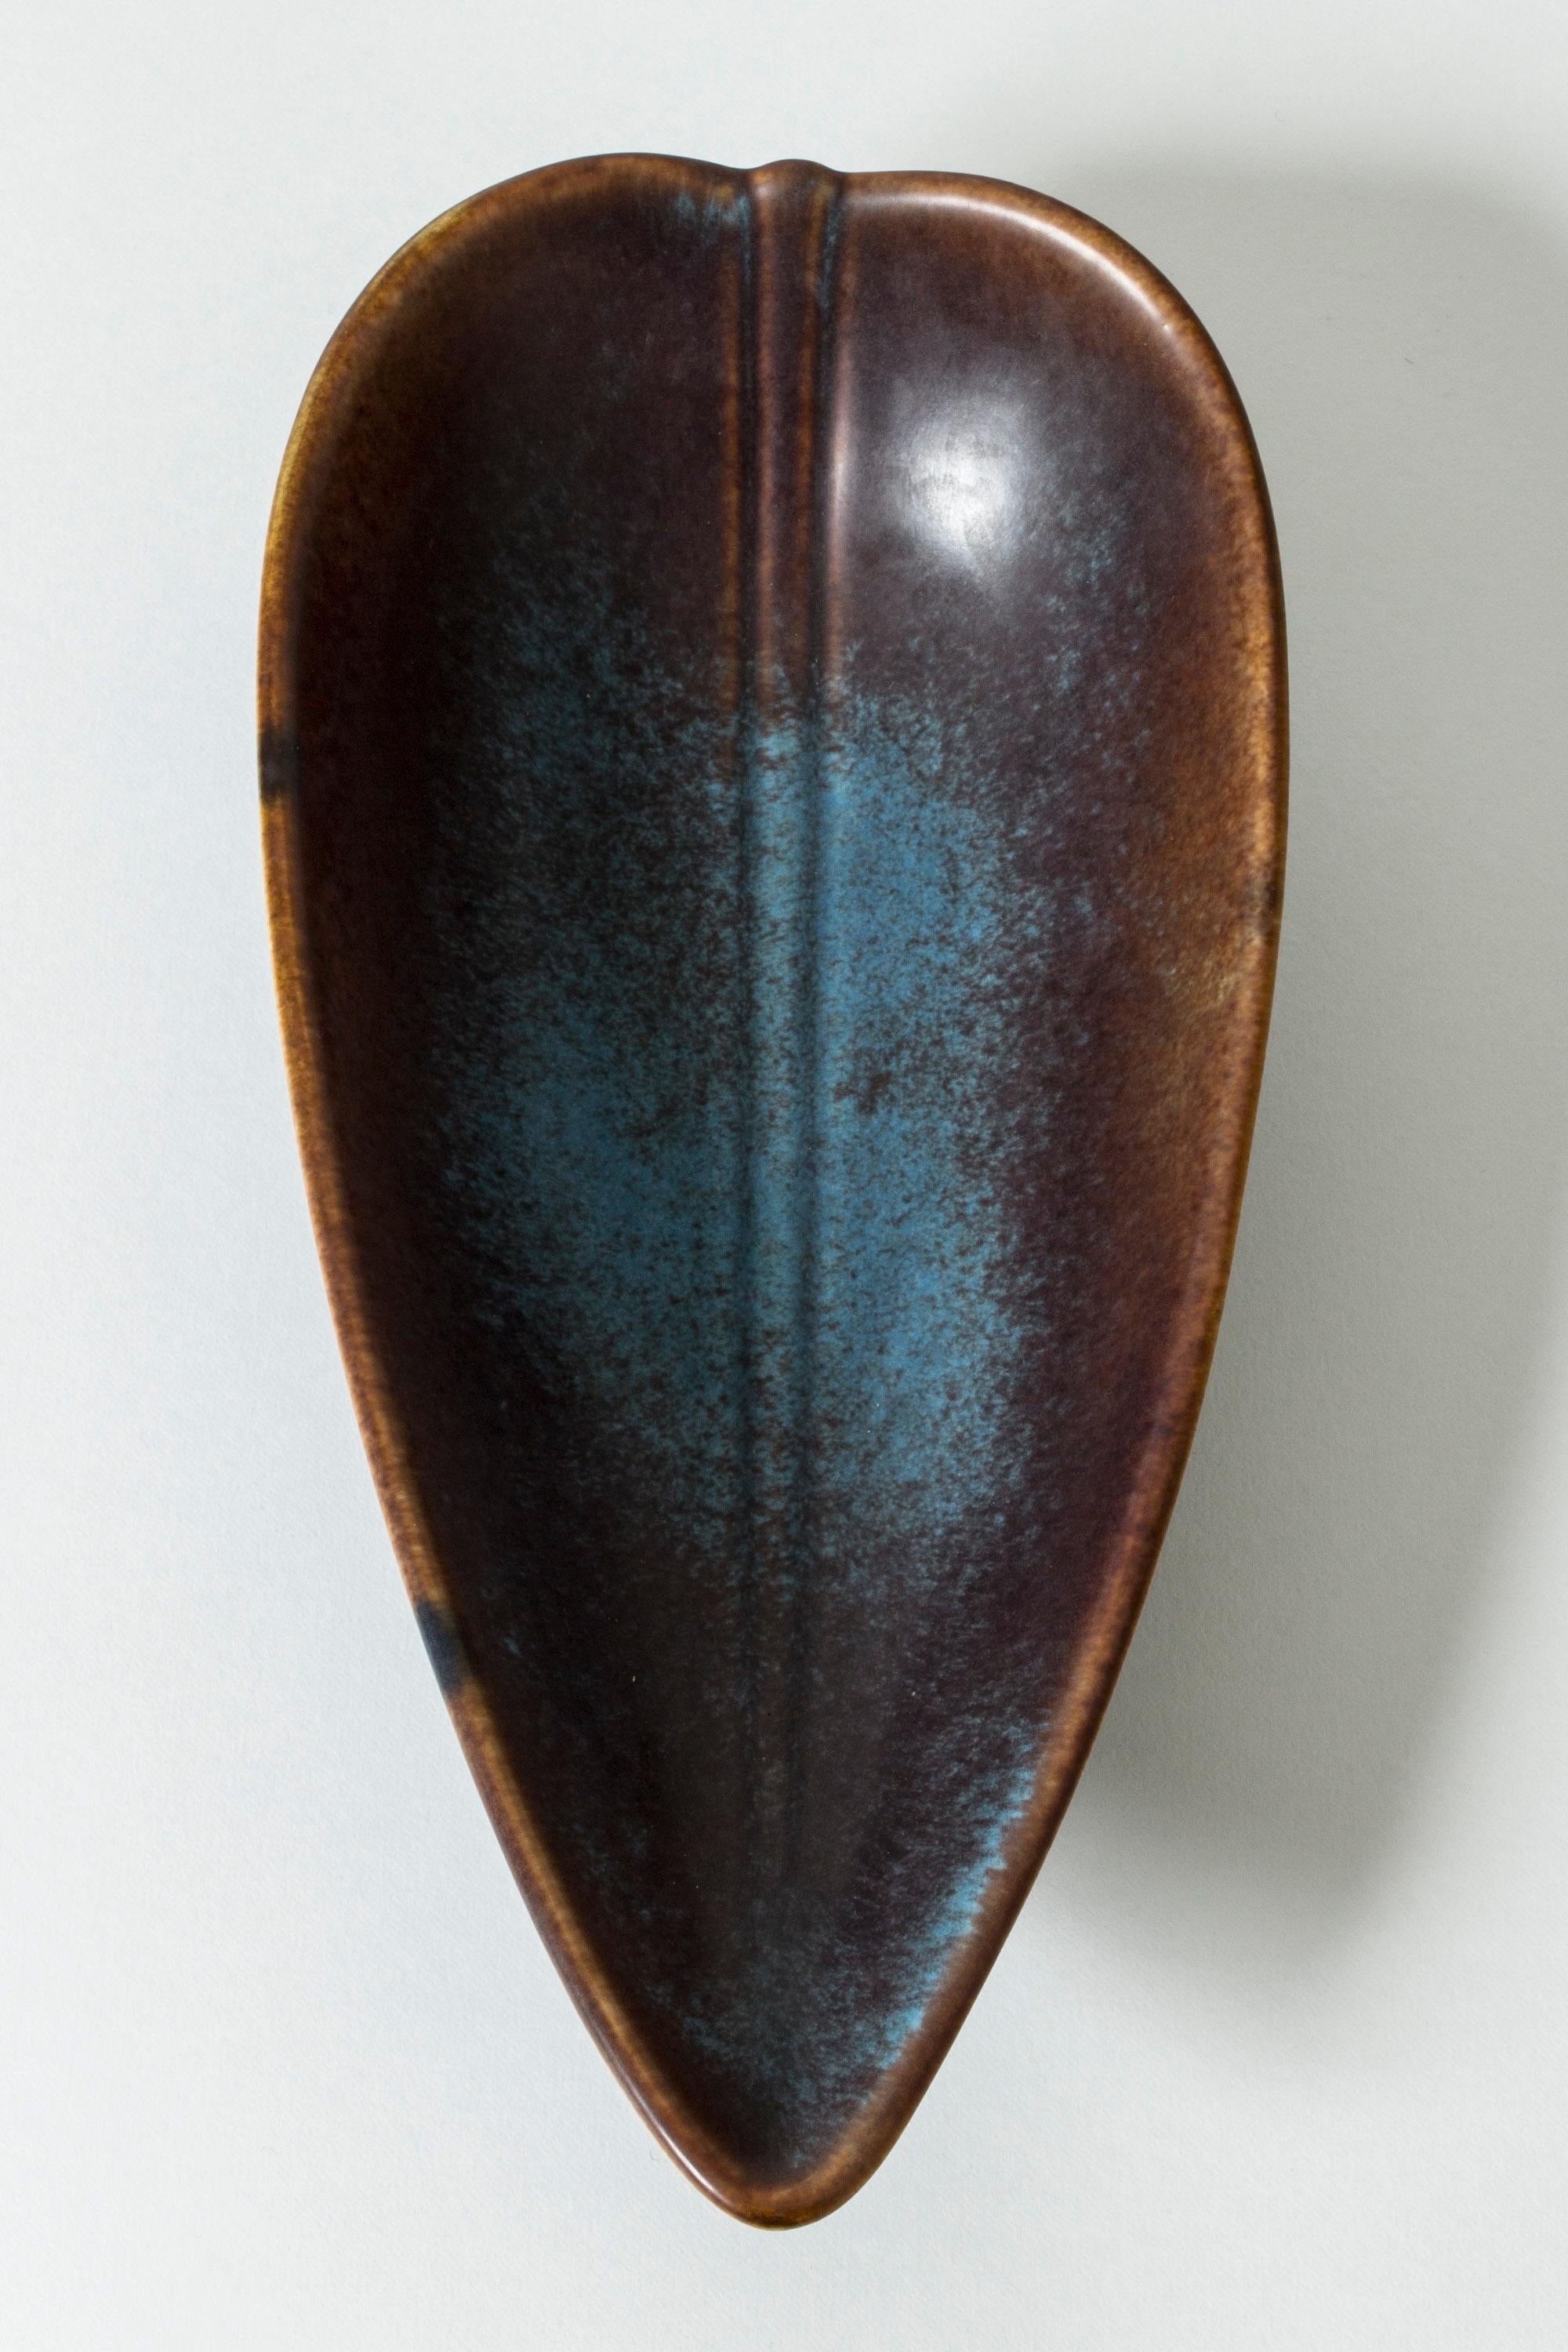 Beautiful stoneware platter in a leaf shape by Gunnar Nylund. Purplish brown glaze with contrasting bright blue areas.

Gunnar Nylund was one of the most influential ceramicists and designers of the Swedish mid-century period. He was Rörstrand’s